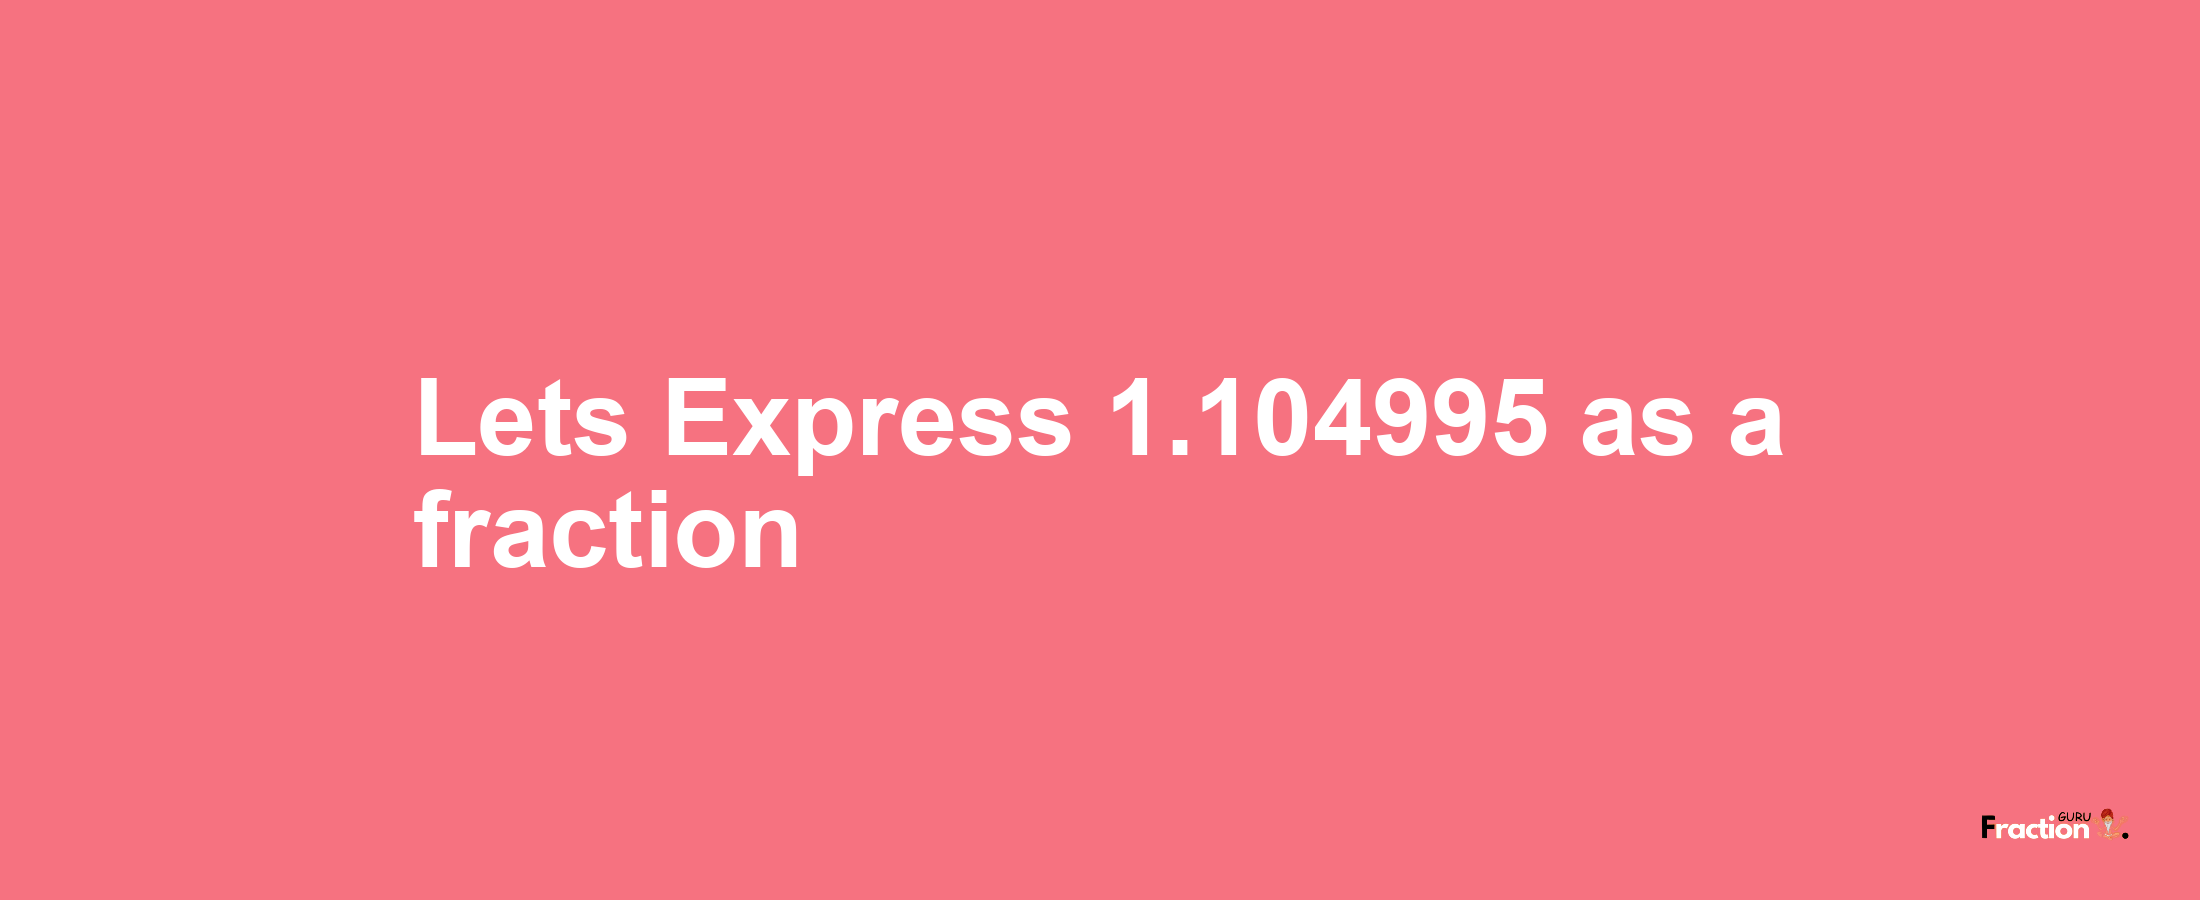 Lets Express 1.104995 as afraction